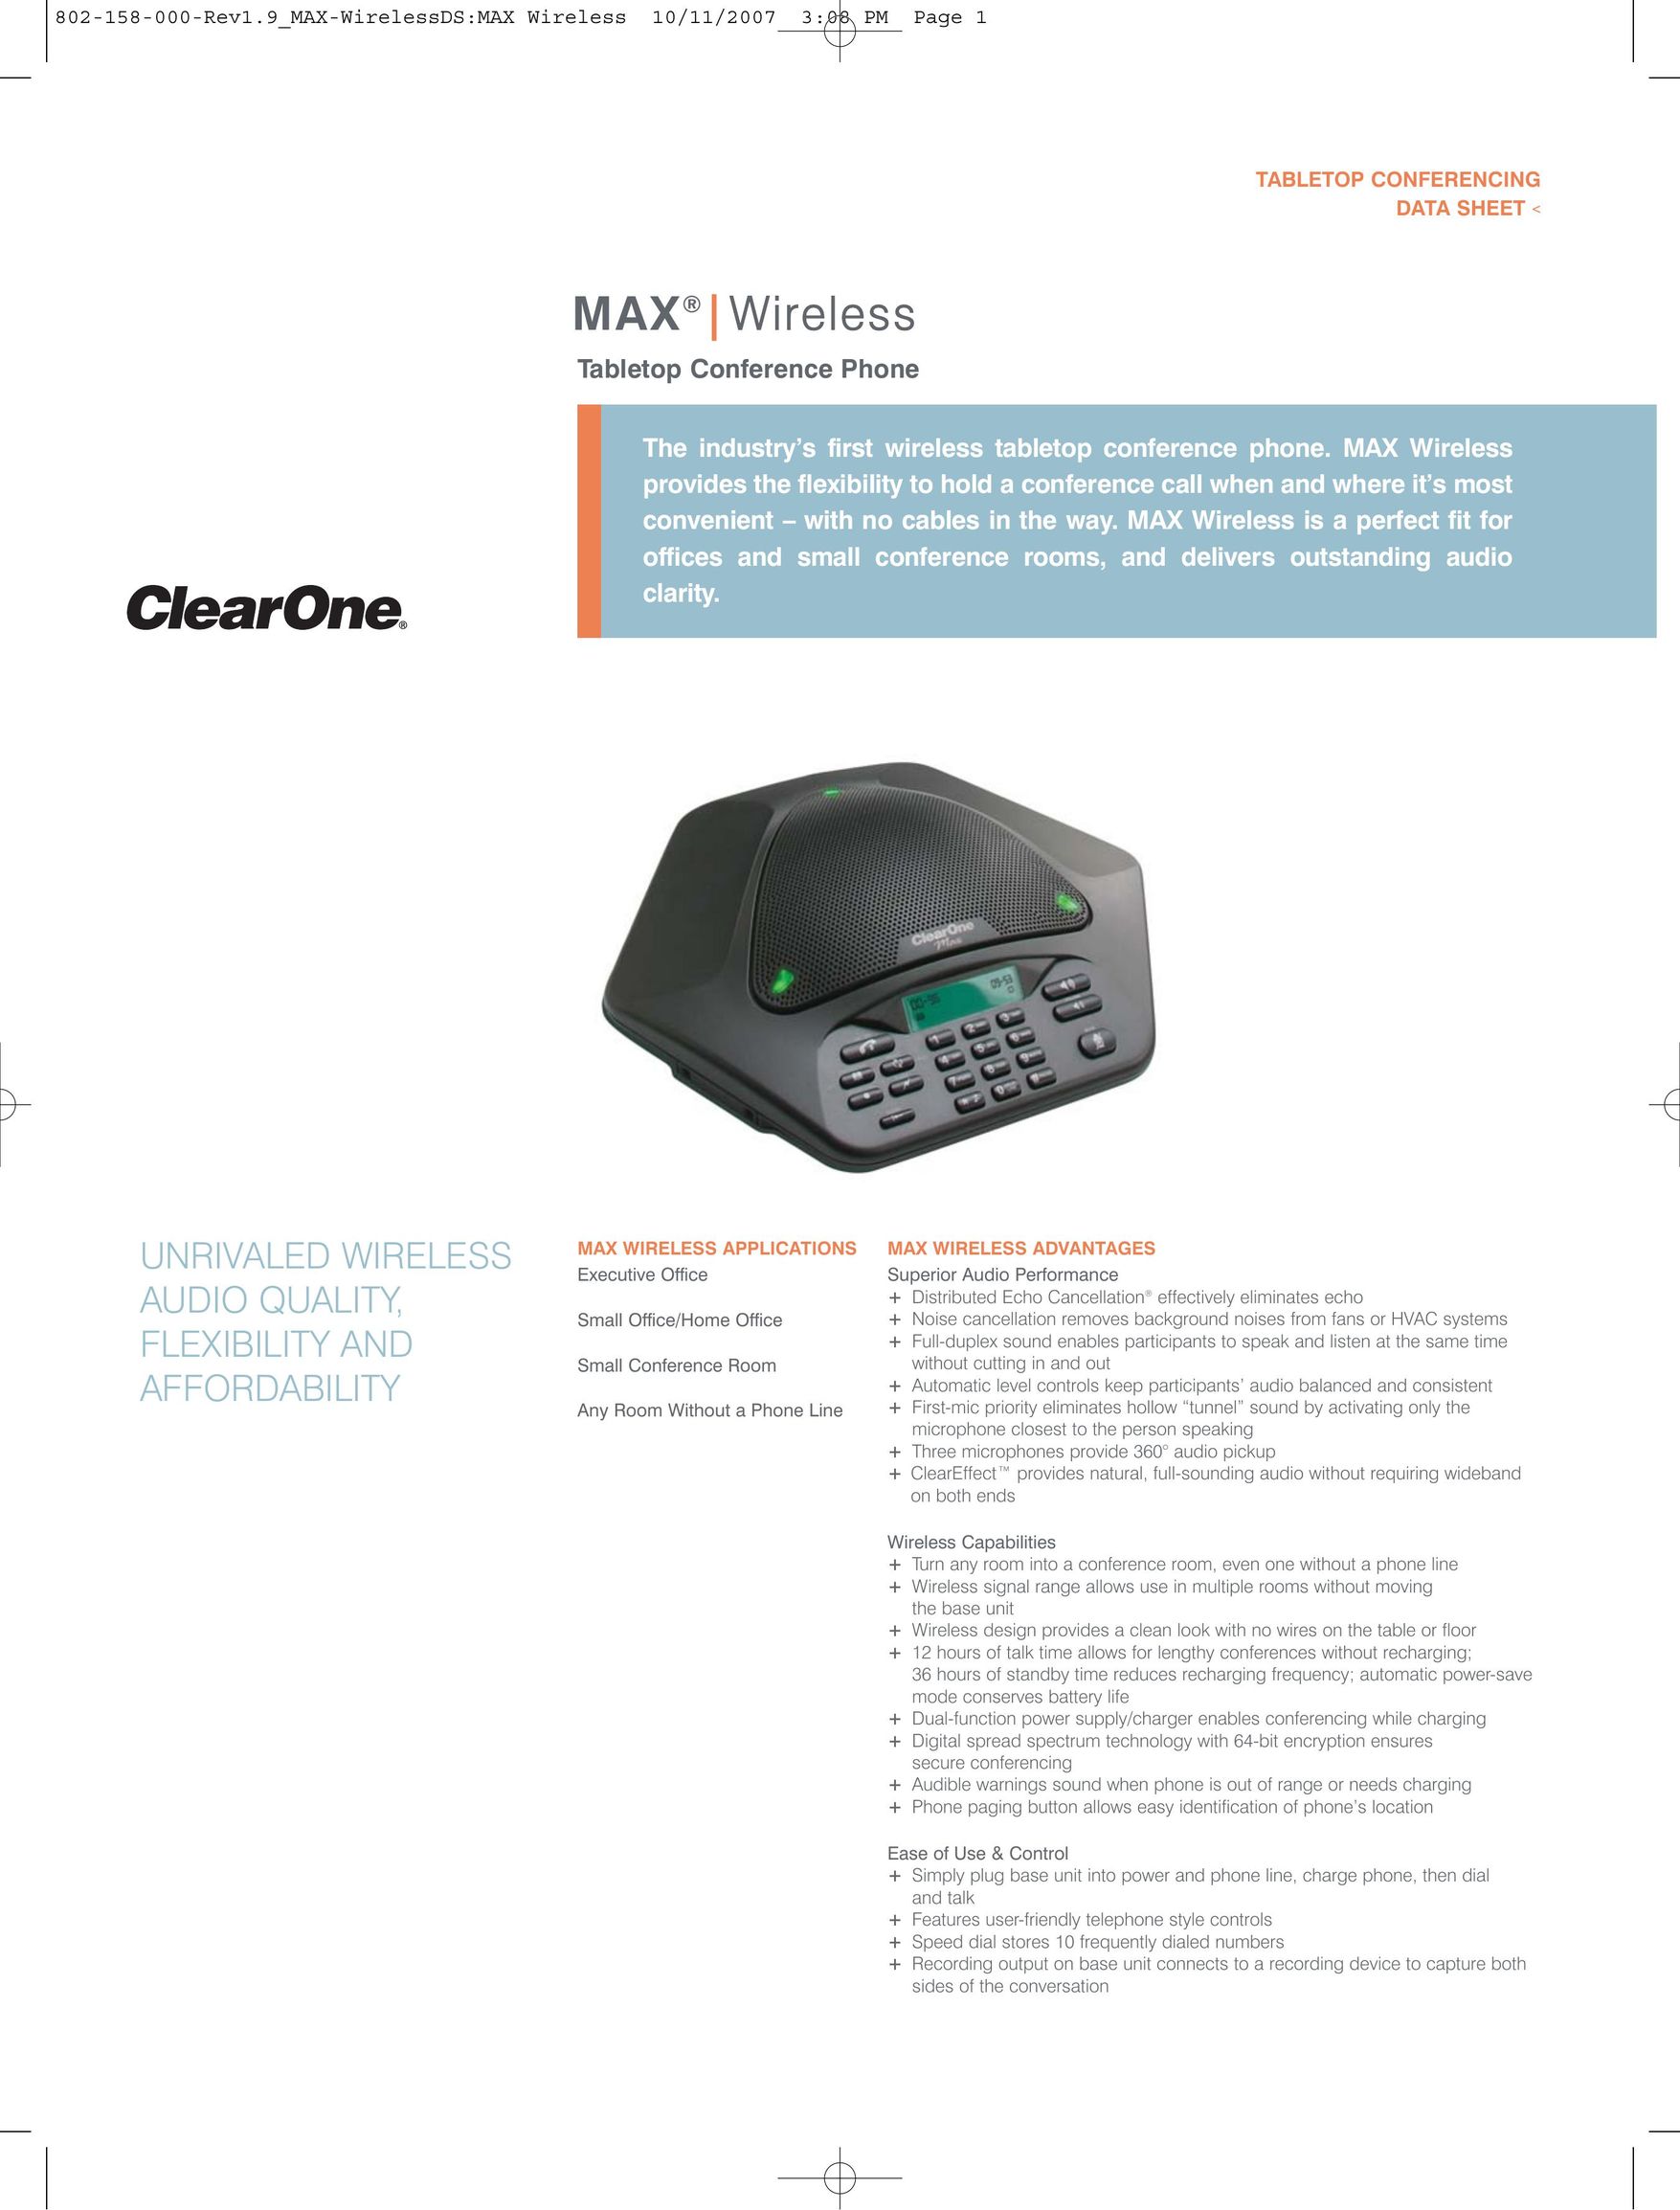 ClearOne comm 910-158-007 Conference Phone User Manual